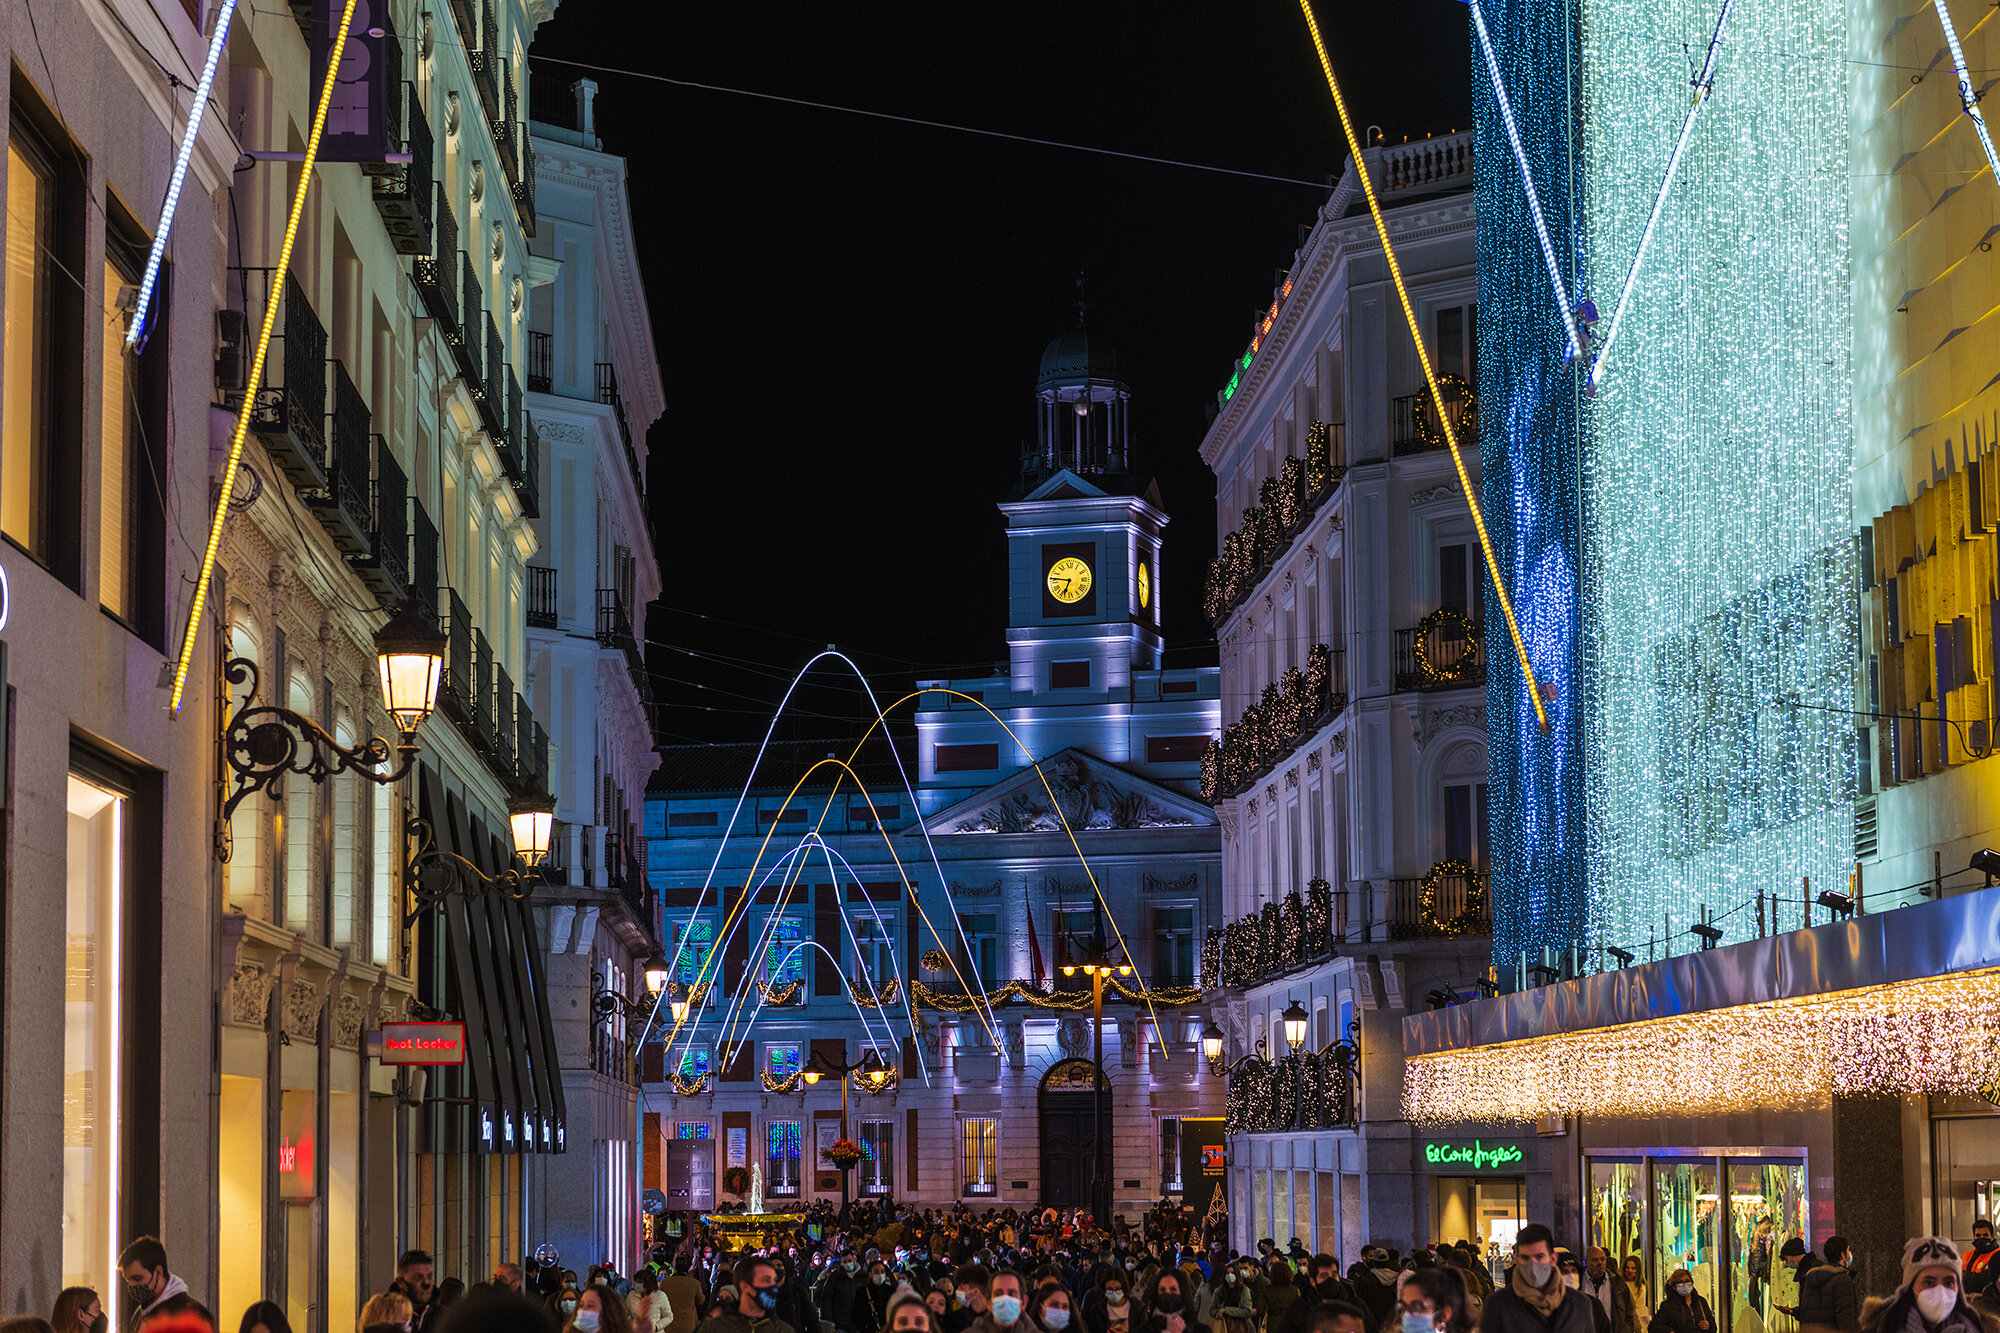 Crowds of people gather at the calle Preciados in Madrid under the Christmas lights.